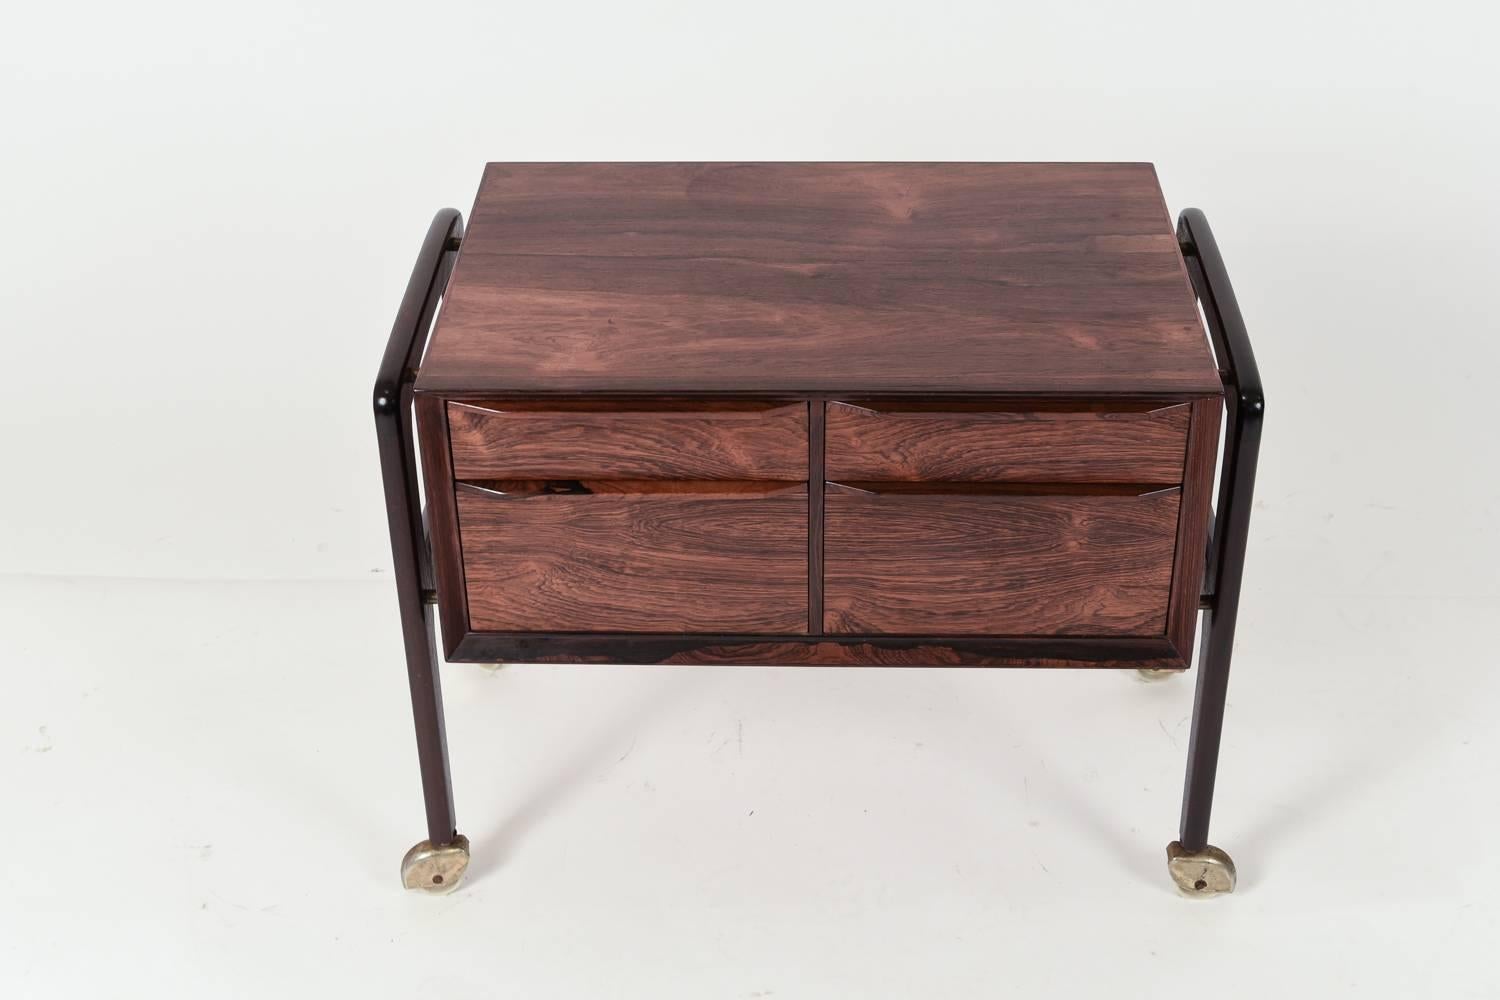 This is an adorable, little Danish Mid-Century rosewood sewing table. On wheels for easy movement.